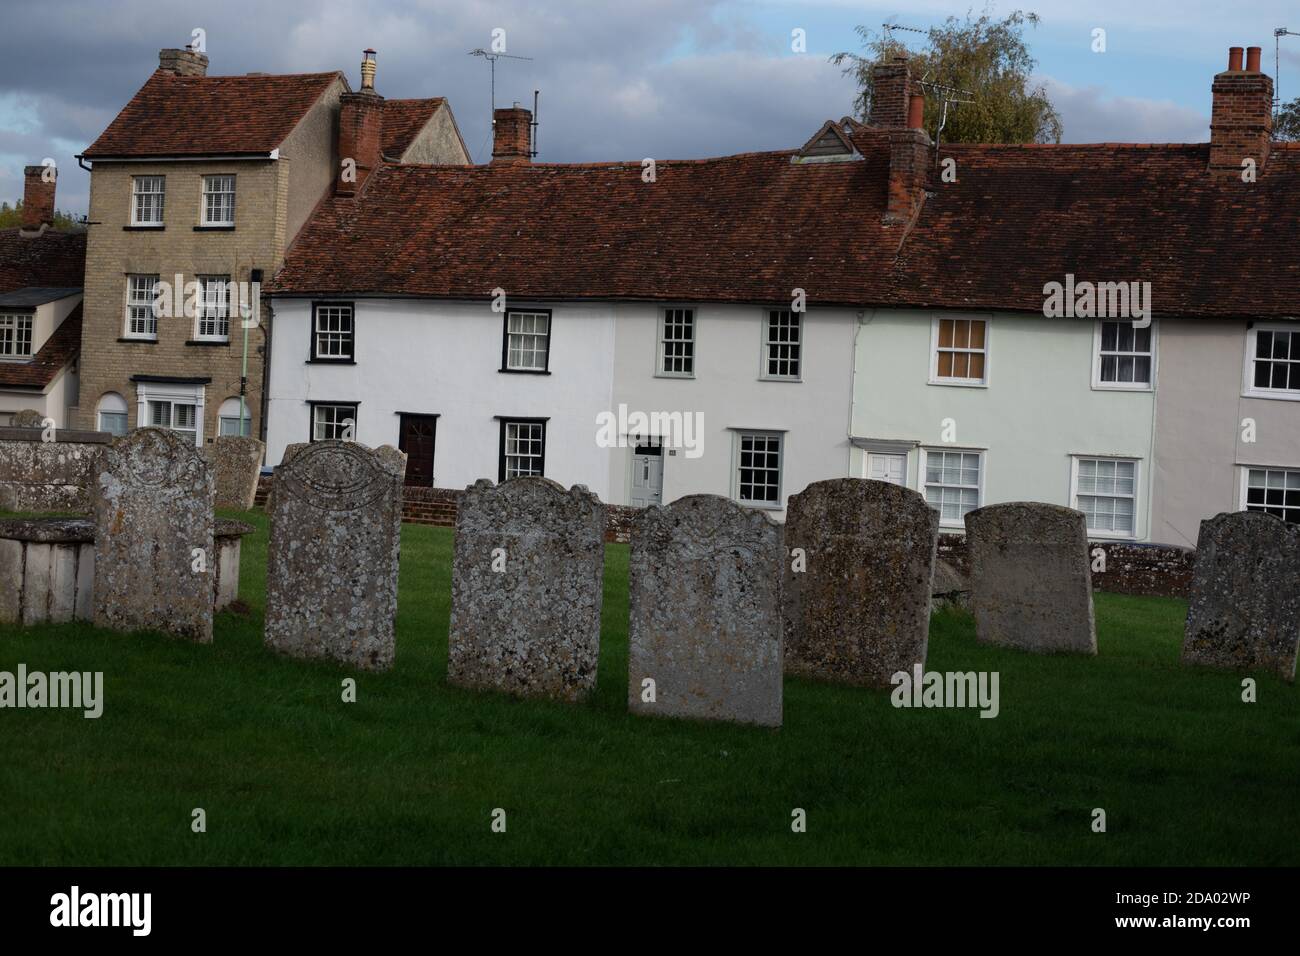 Gravestones and cottages in Clare a market town in Suffolk, England, known as old wool town of Clare Stock Photo